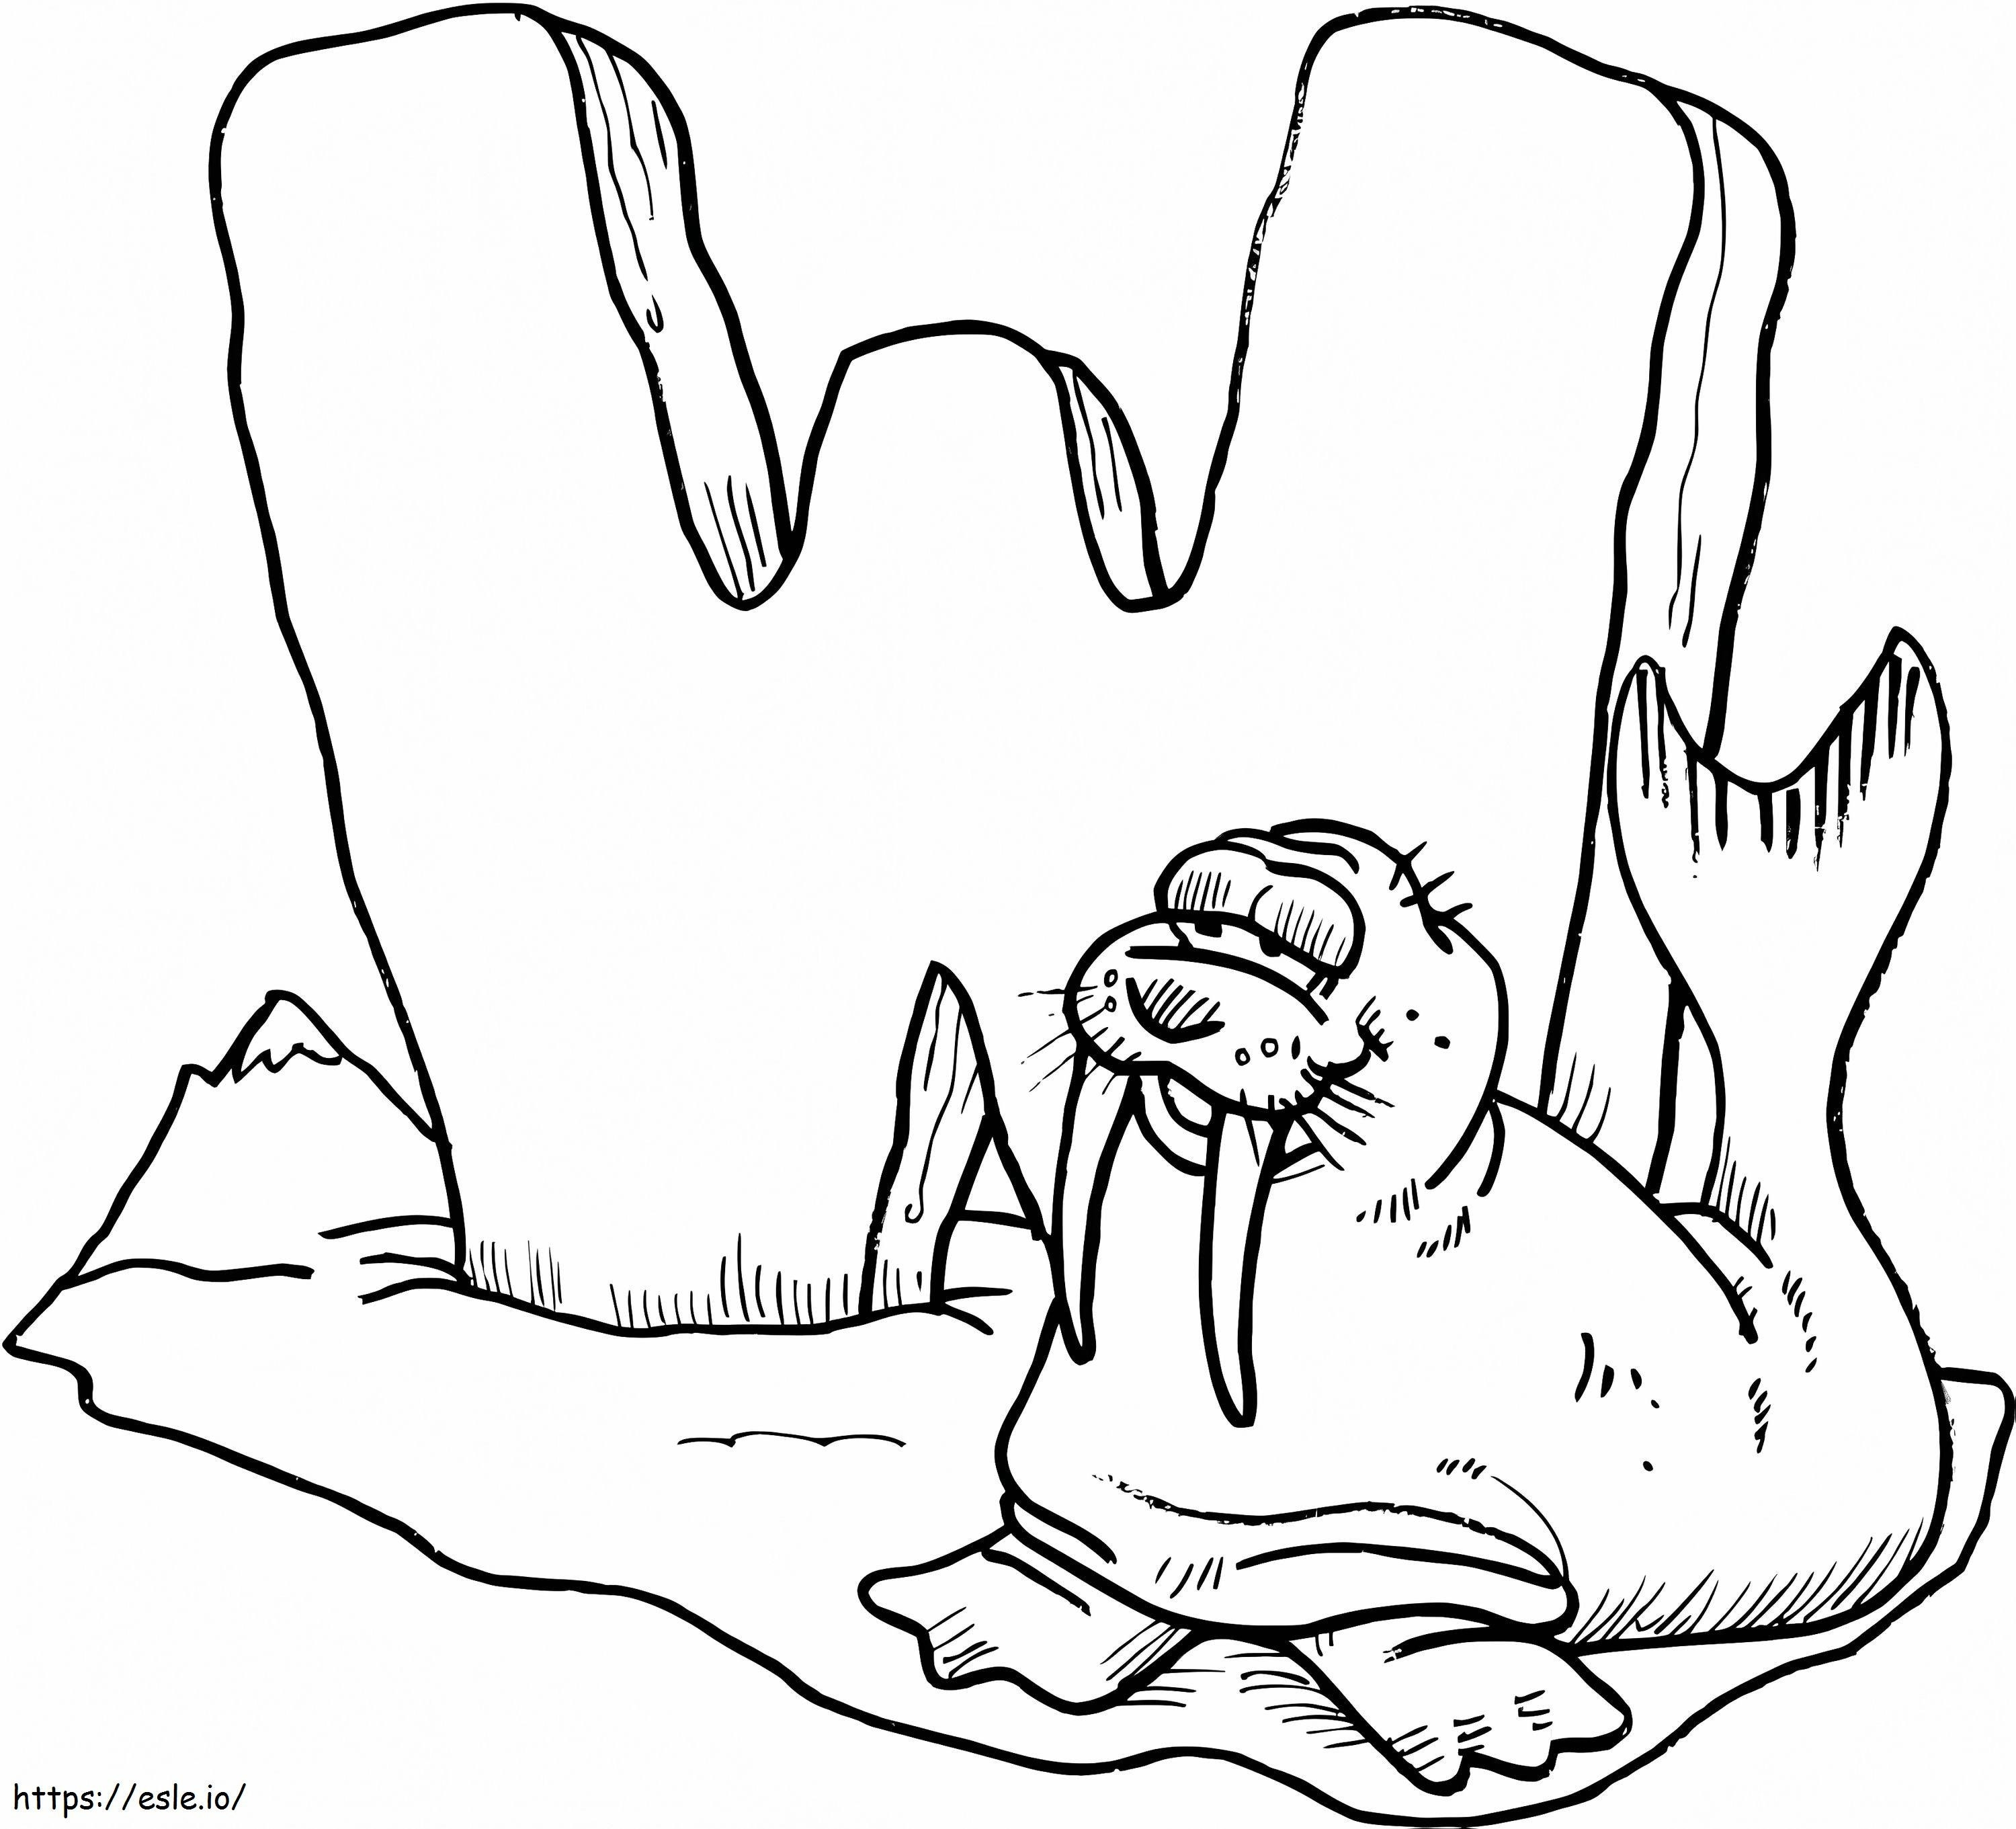 Walrus Letter W 1 coloring page